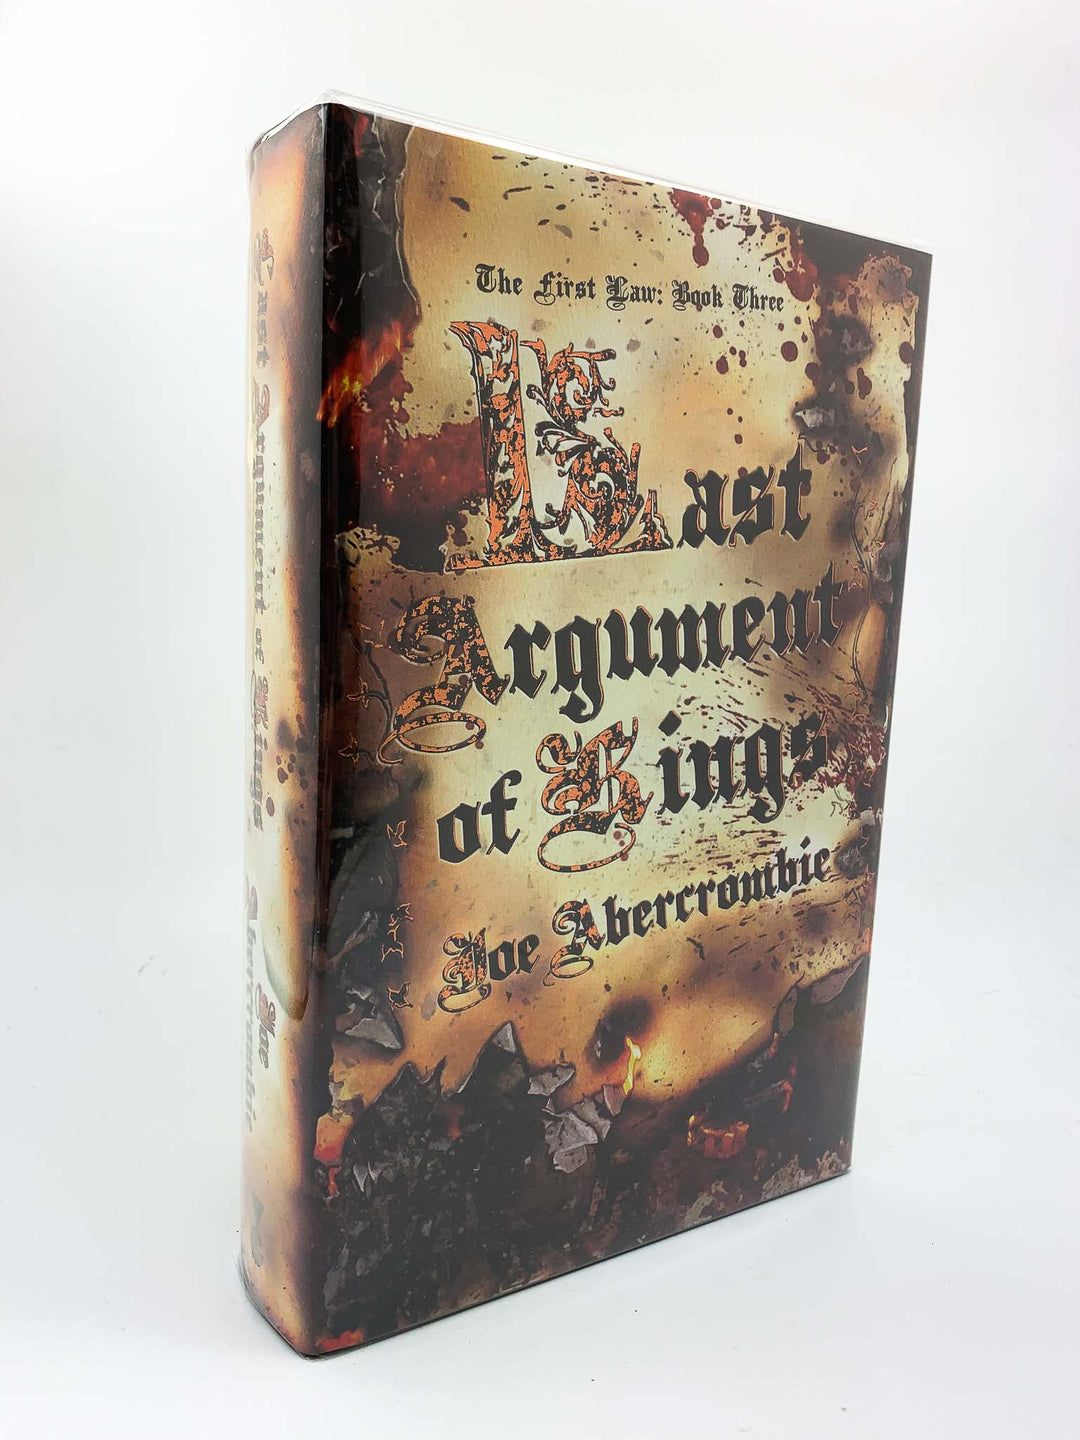 Abercrombie, Joe - Last Argument of Kings - SIGNED | front cover